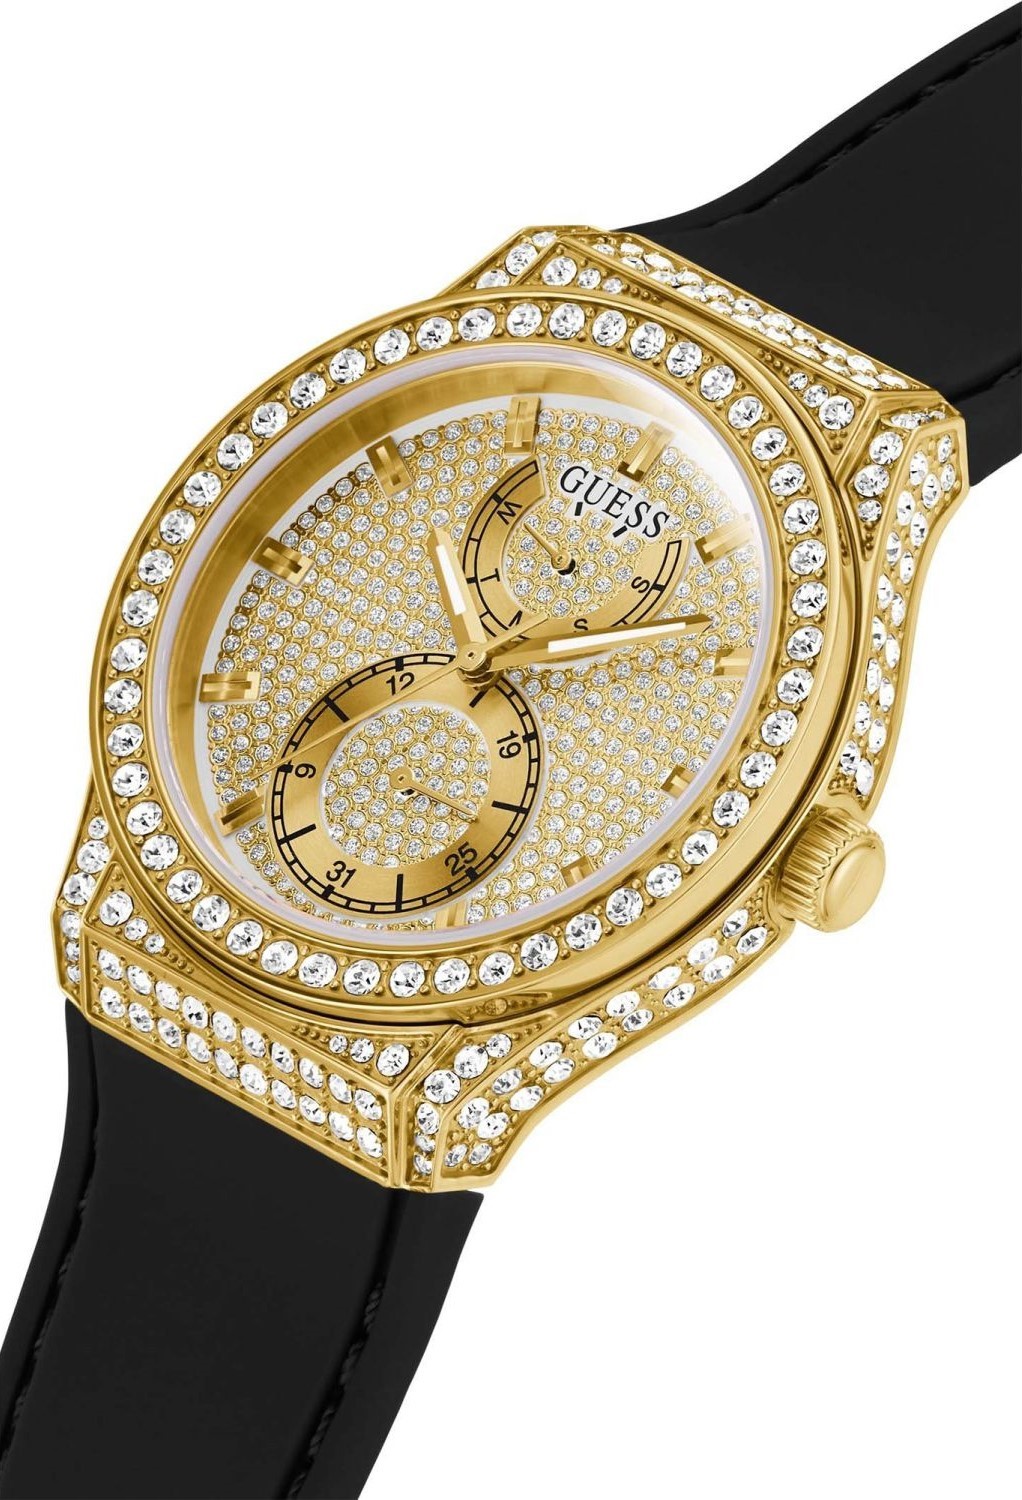 ĐỒNG HỒ NỮ GUESS MULTIFUNCTION CRYSTALLIZED PRINCESS BLACK GOLD TONE LADIES WATCH GW0439L2 4